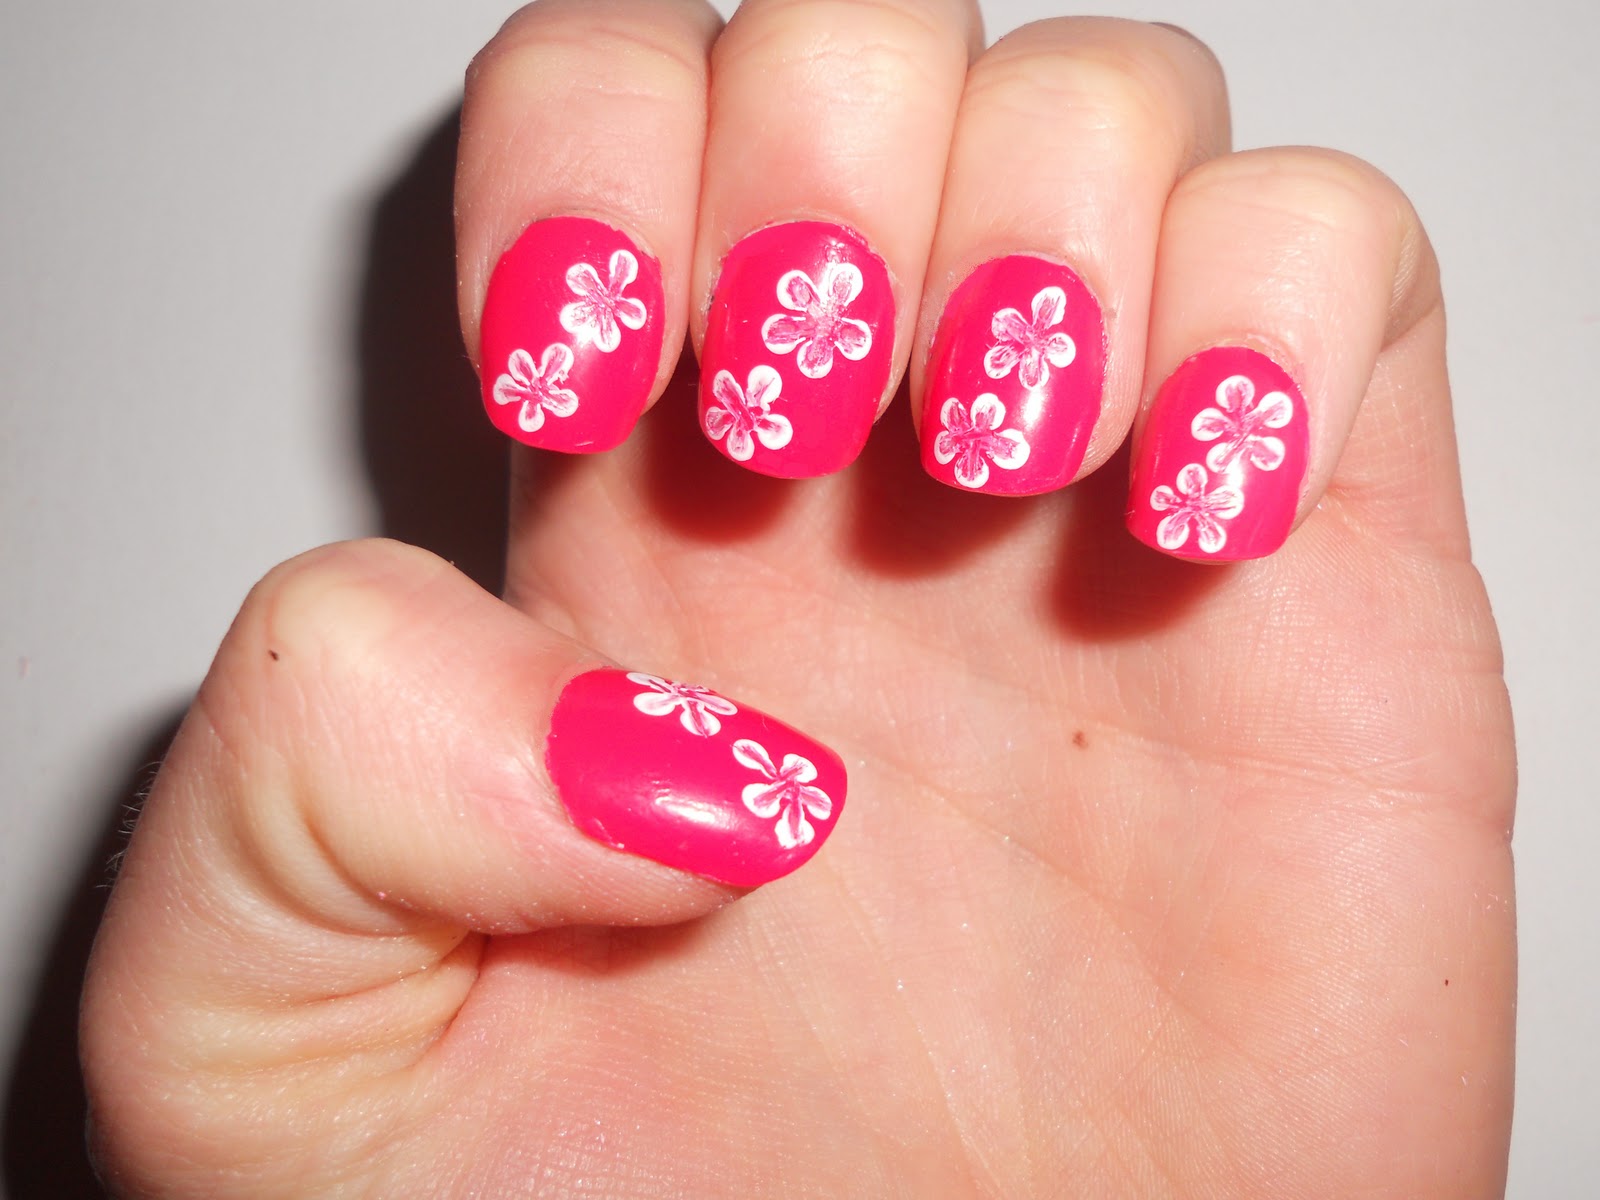 Polished-Perfect: Flower Nail Art :)